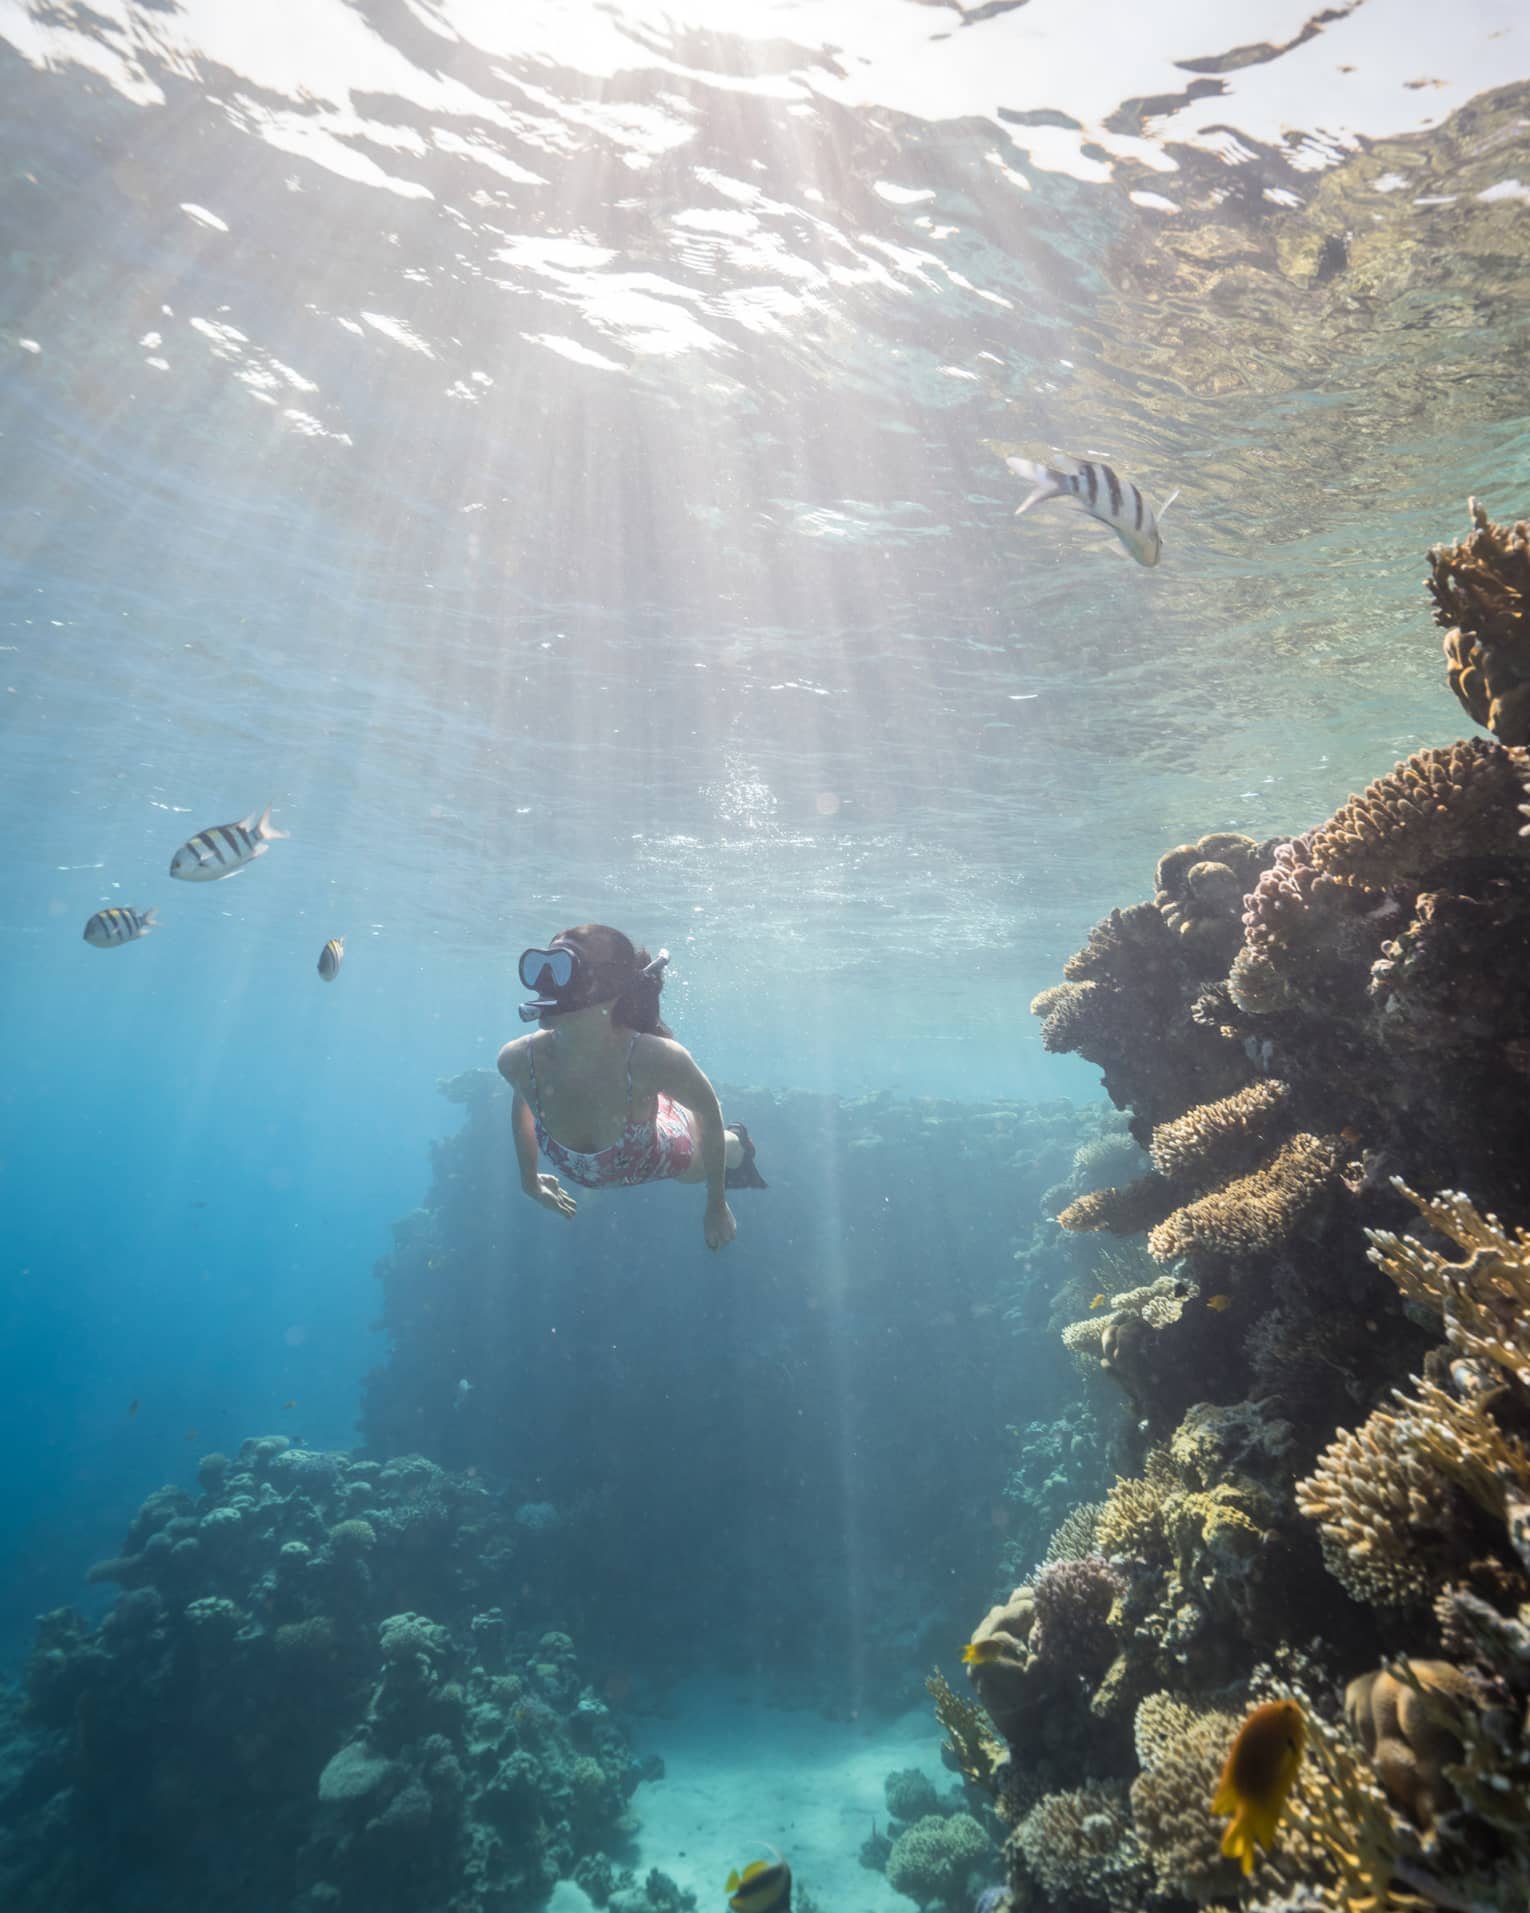 Woman in pink bathing suit snorkels among colourful fish and coral reefs, sunlight streaming through the water's surface